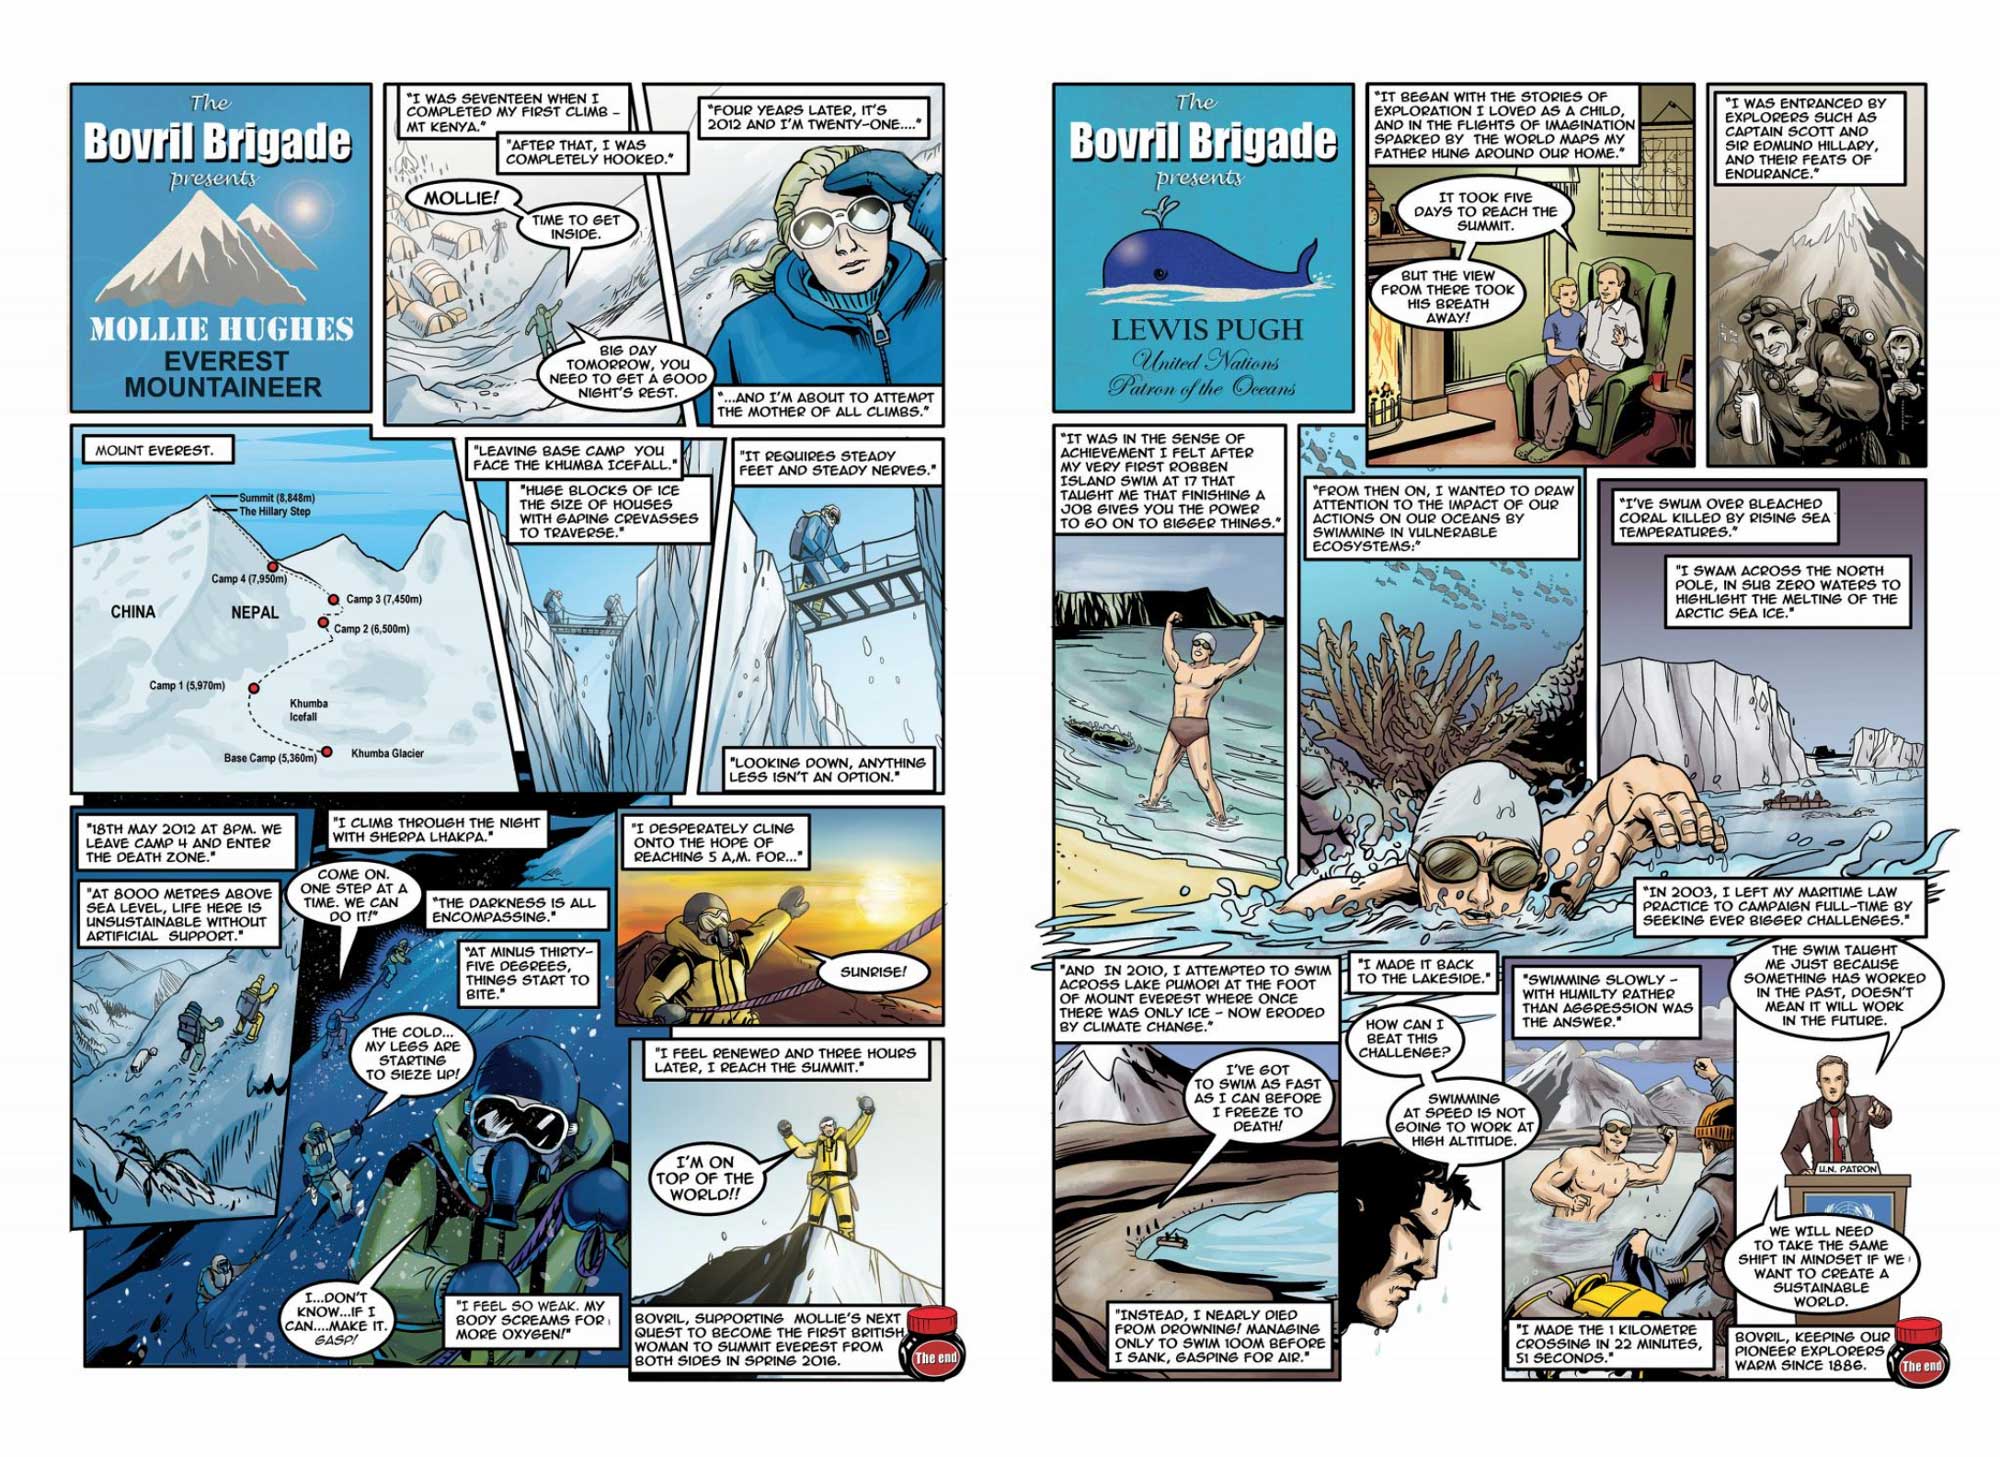 Bovril's 130th anniversary campaign comic, written by Pat Mills, gave Andrew the opportunity to collaborate with Lewis Pugh, UN Patron of the Oceans, to tell his story about his ongoing quest to save the planet's oceans from climate change